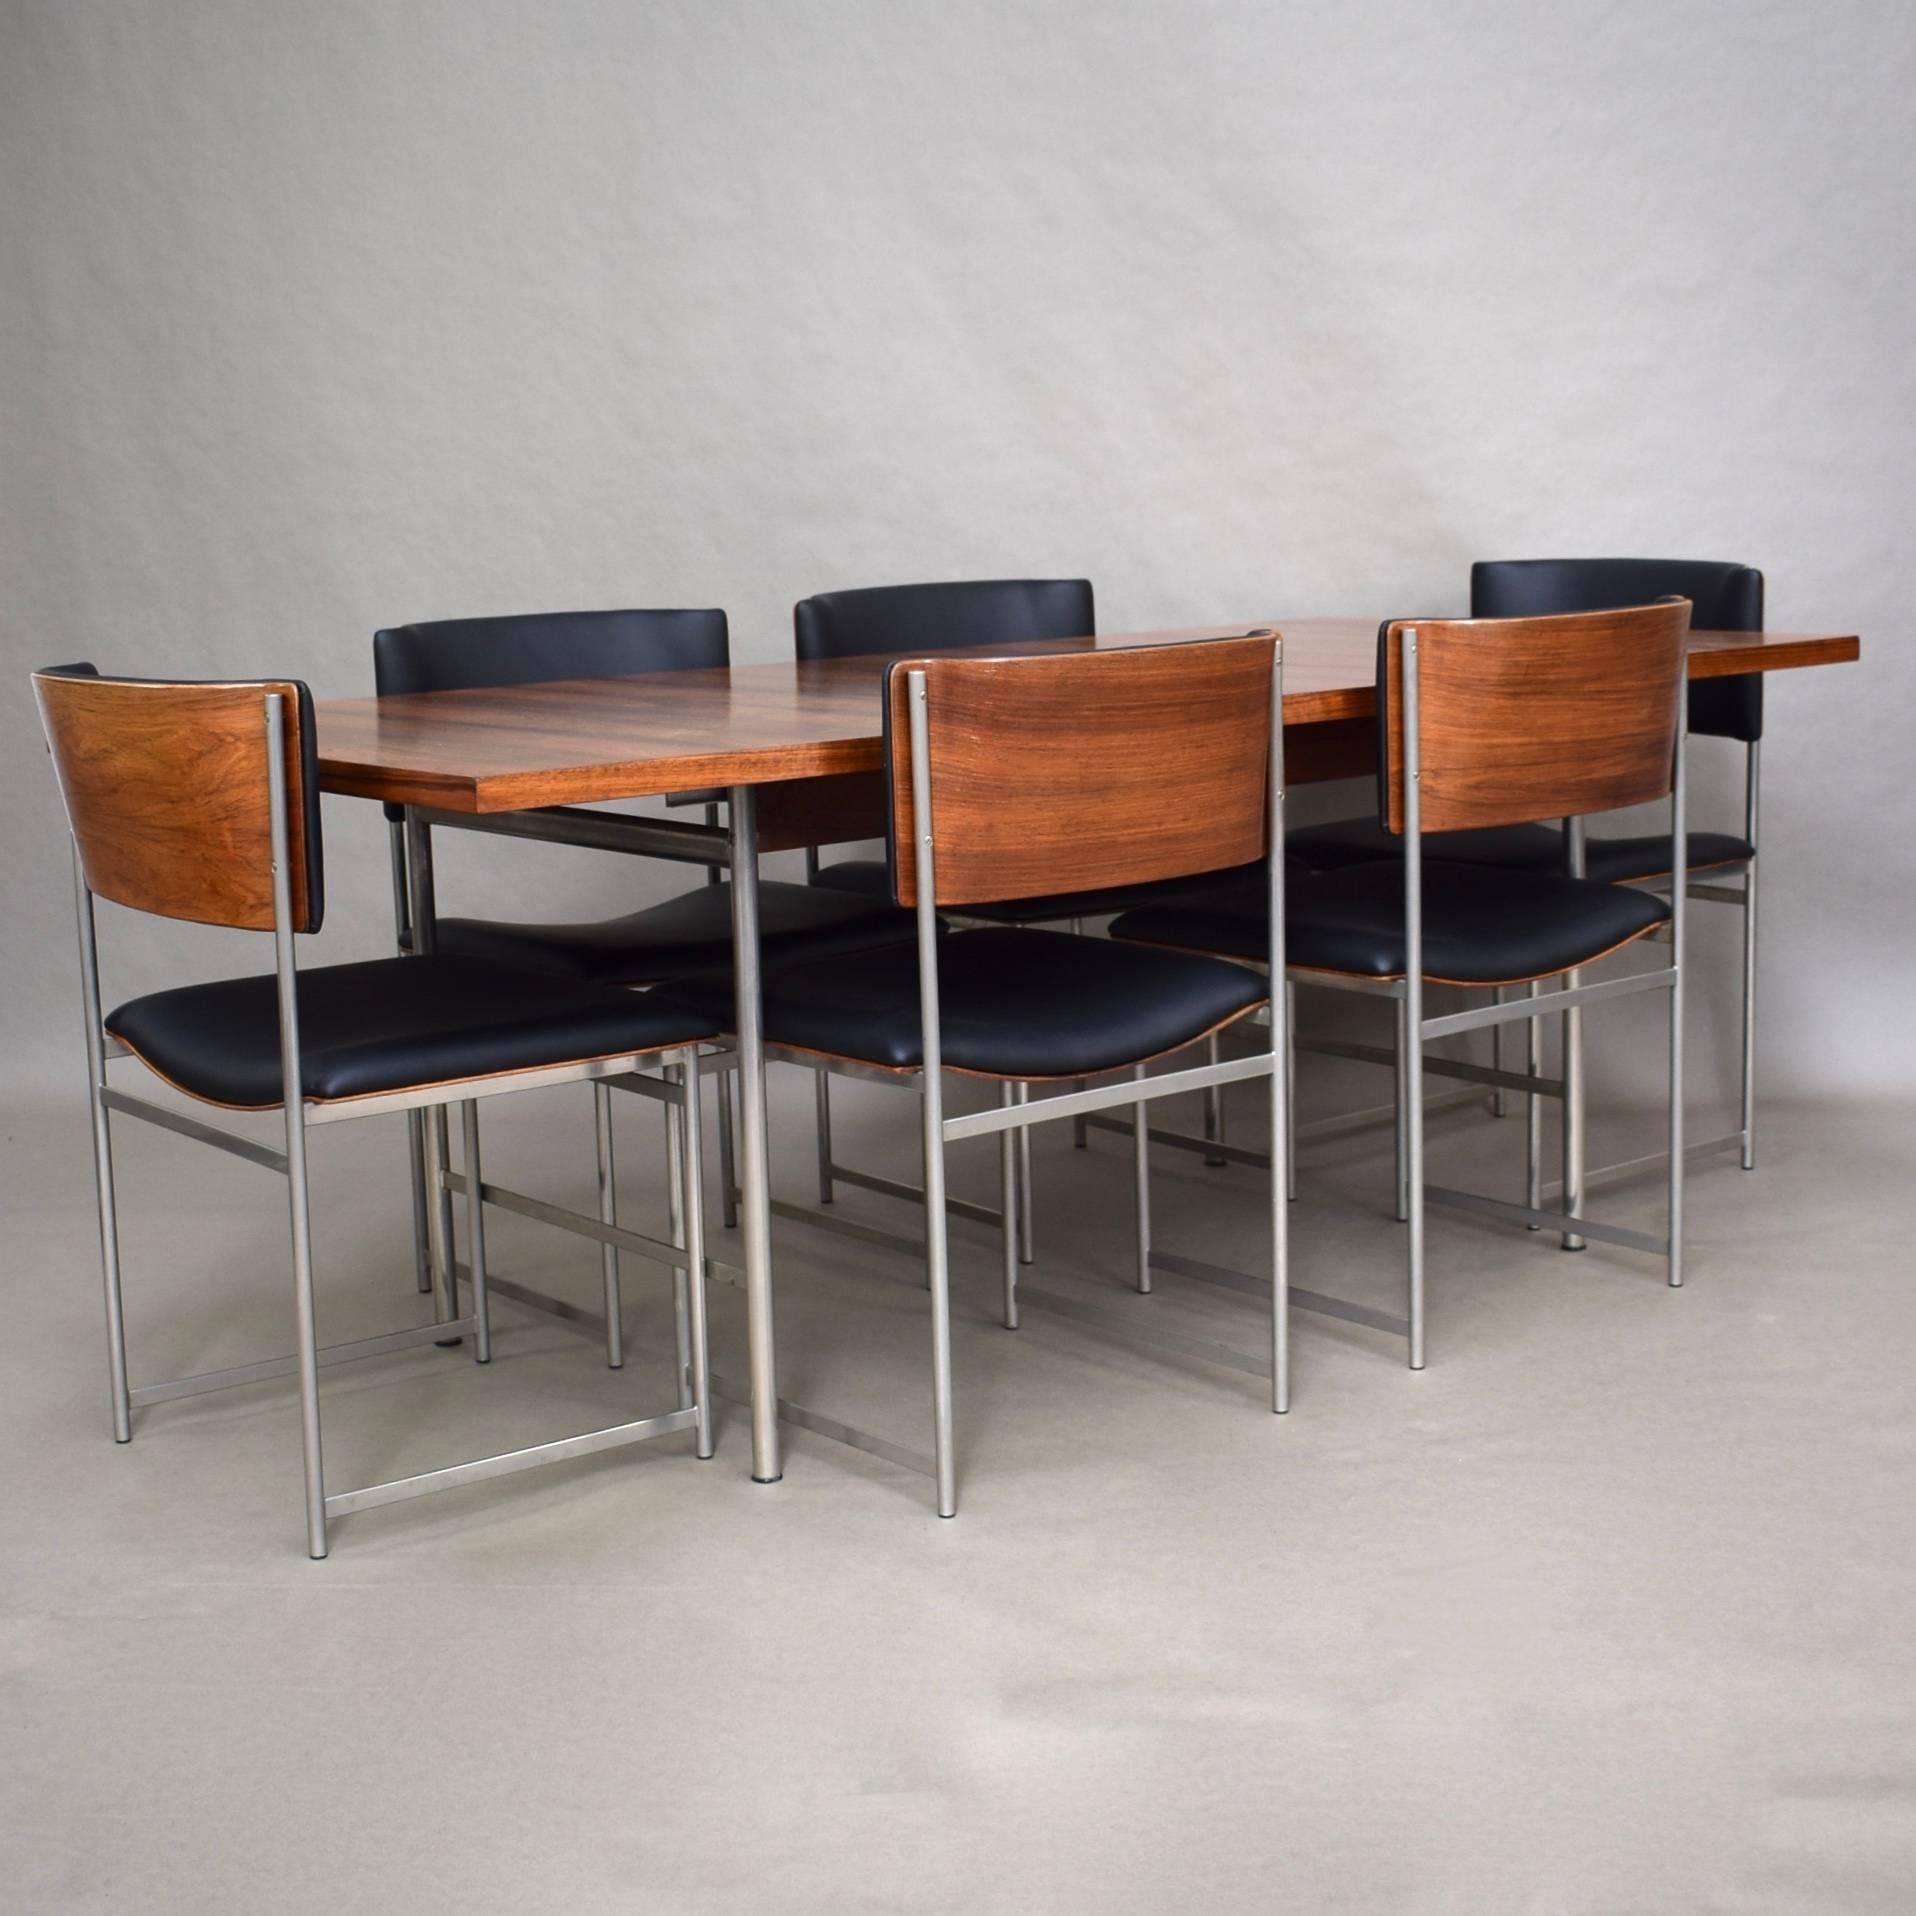 Gorgeous and rare Brazilian rosewood (Rio palissander) model SM-08 dining set by Cees Braakman.
The backs and seats are made of Brazilian rosewood molded plywood.
The table top and plywood backs have been refinished. The chairs have been